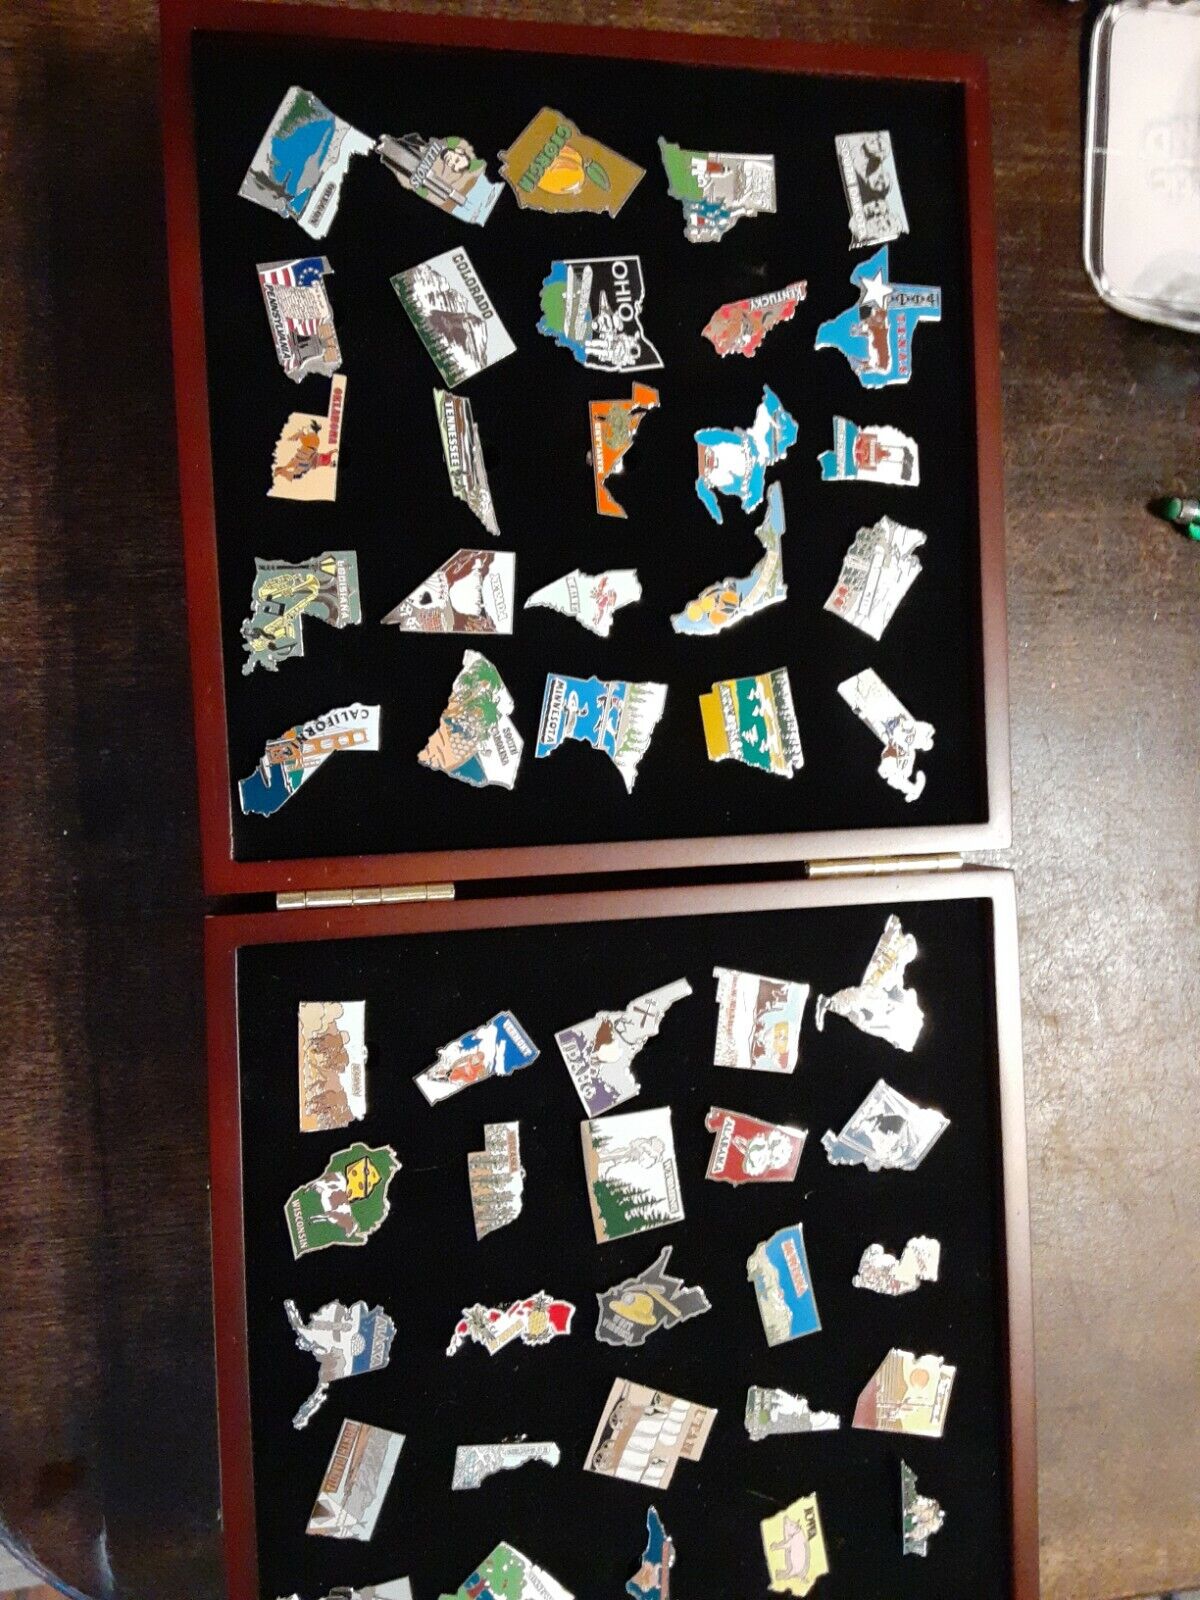  WILLABEE  WARD  50  UNITED STATES  COLLECTOR   PINS  DISPLAY  WITH  CASE